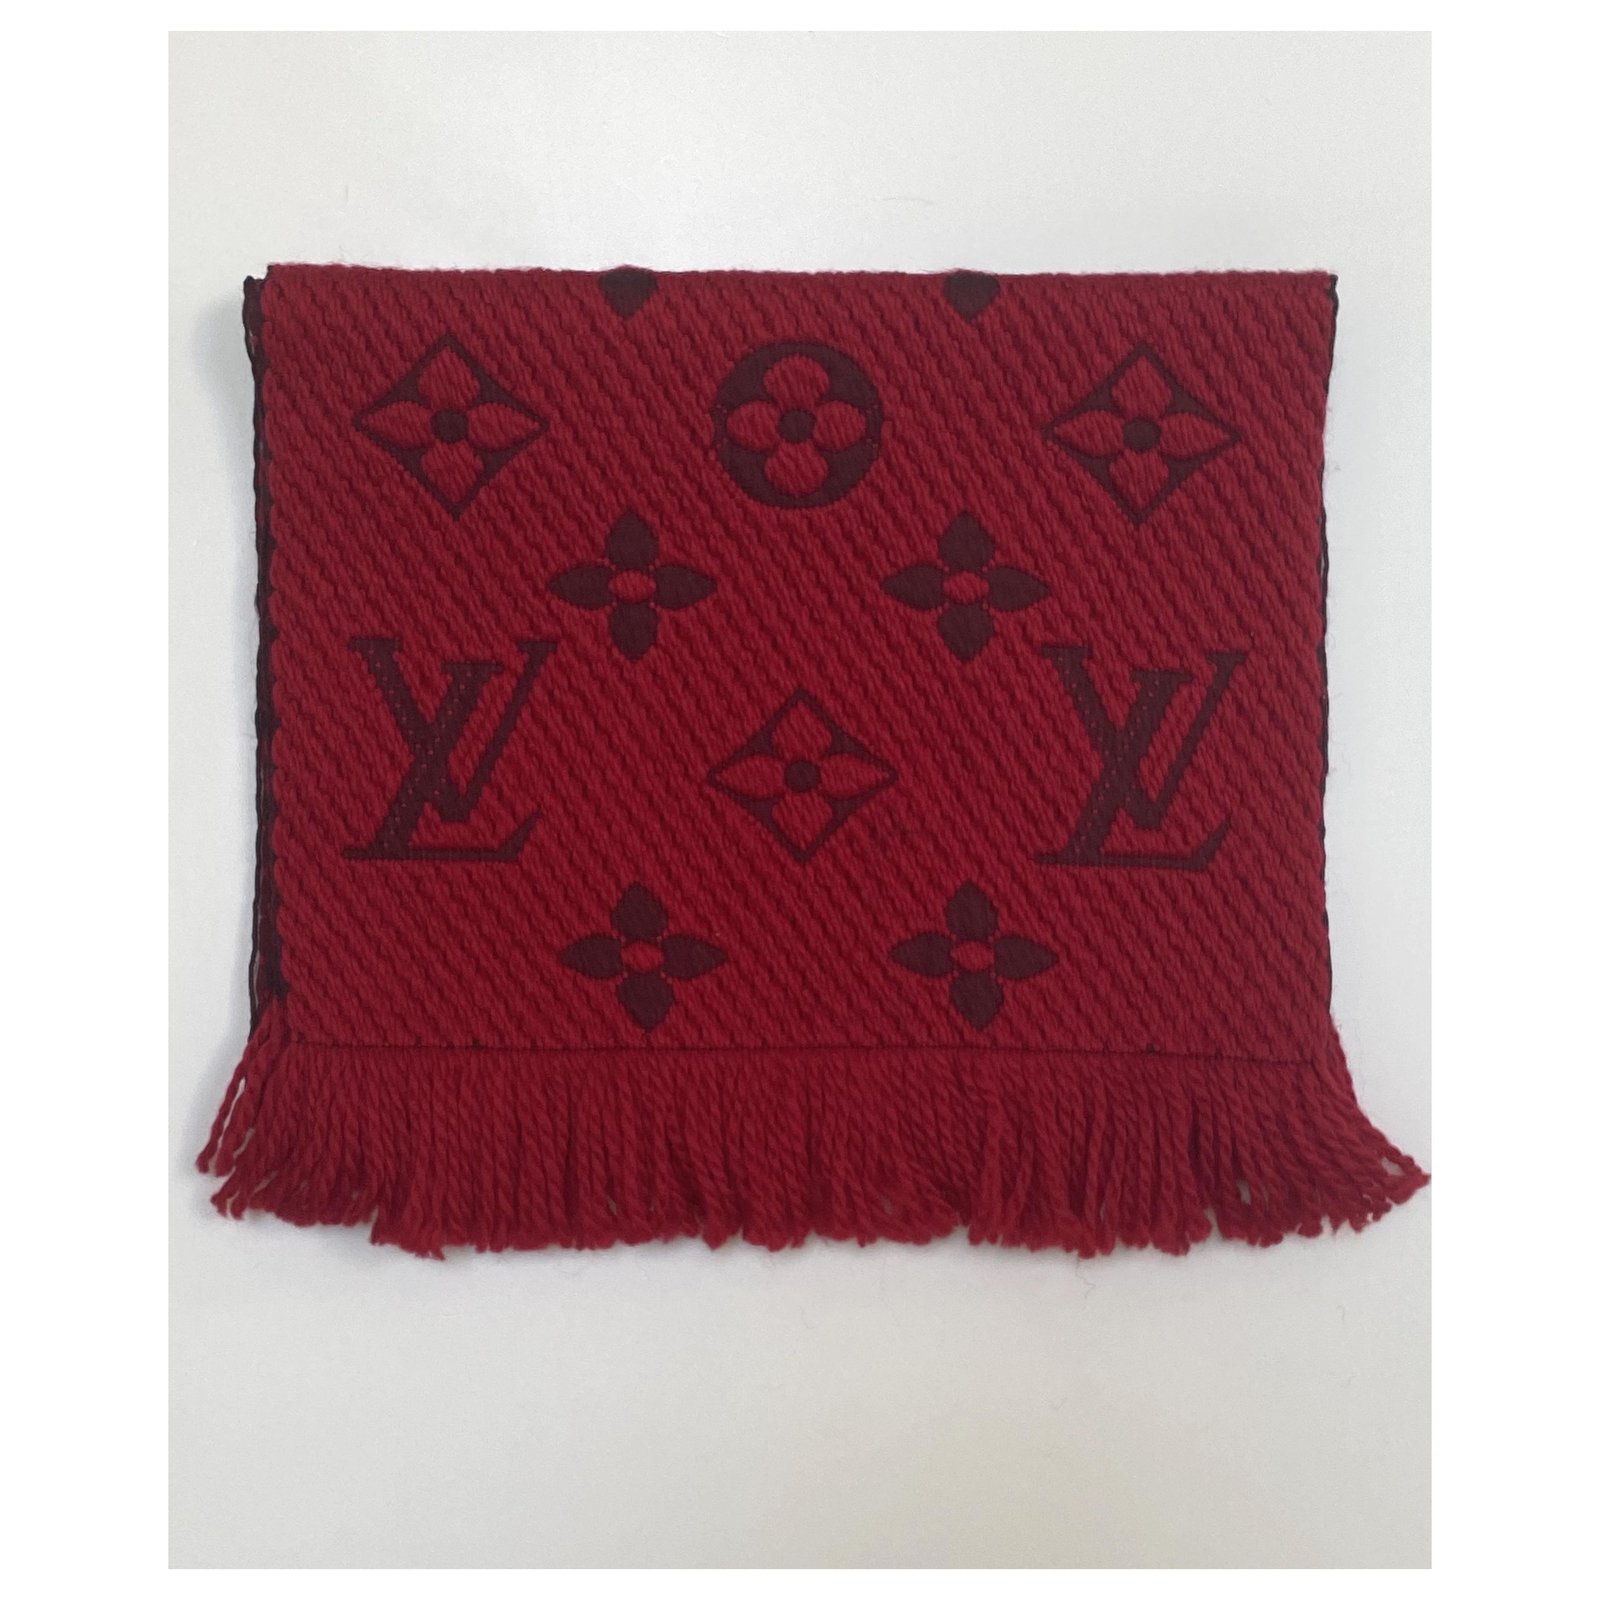 Louis Vuitton logomania scarf in red ruby – Lady Clara's Collection